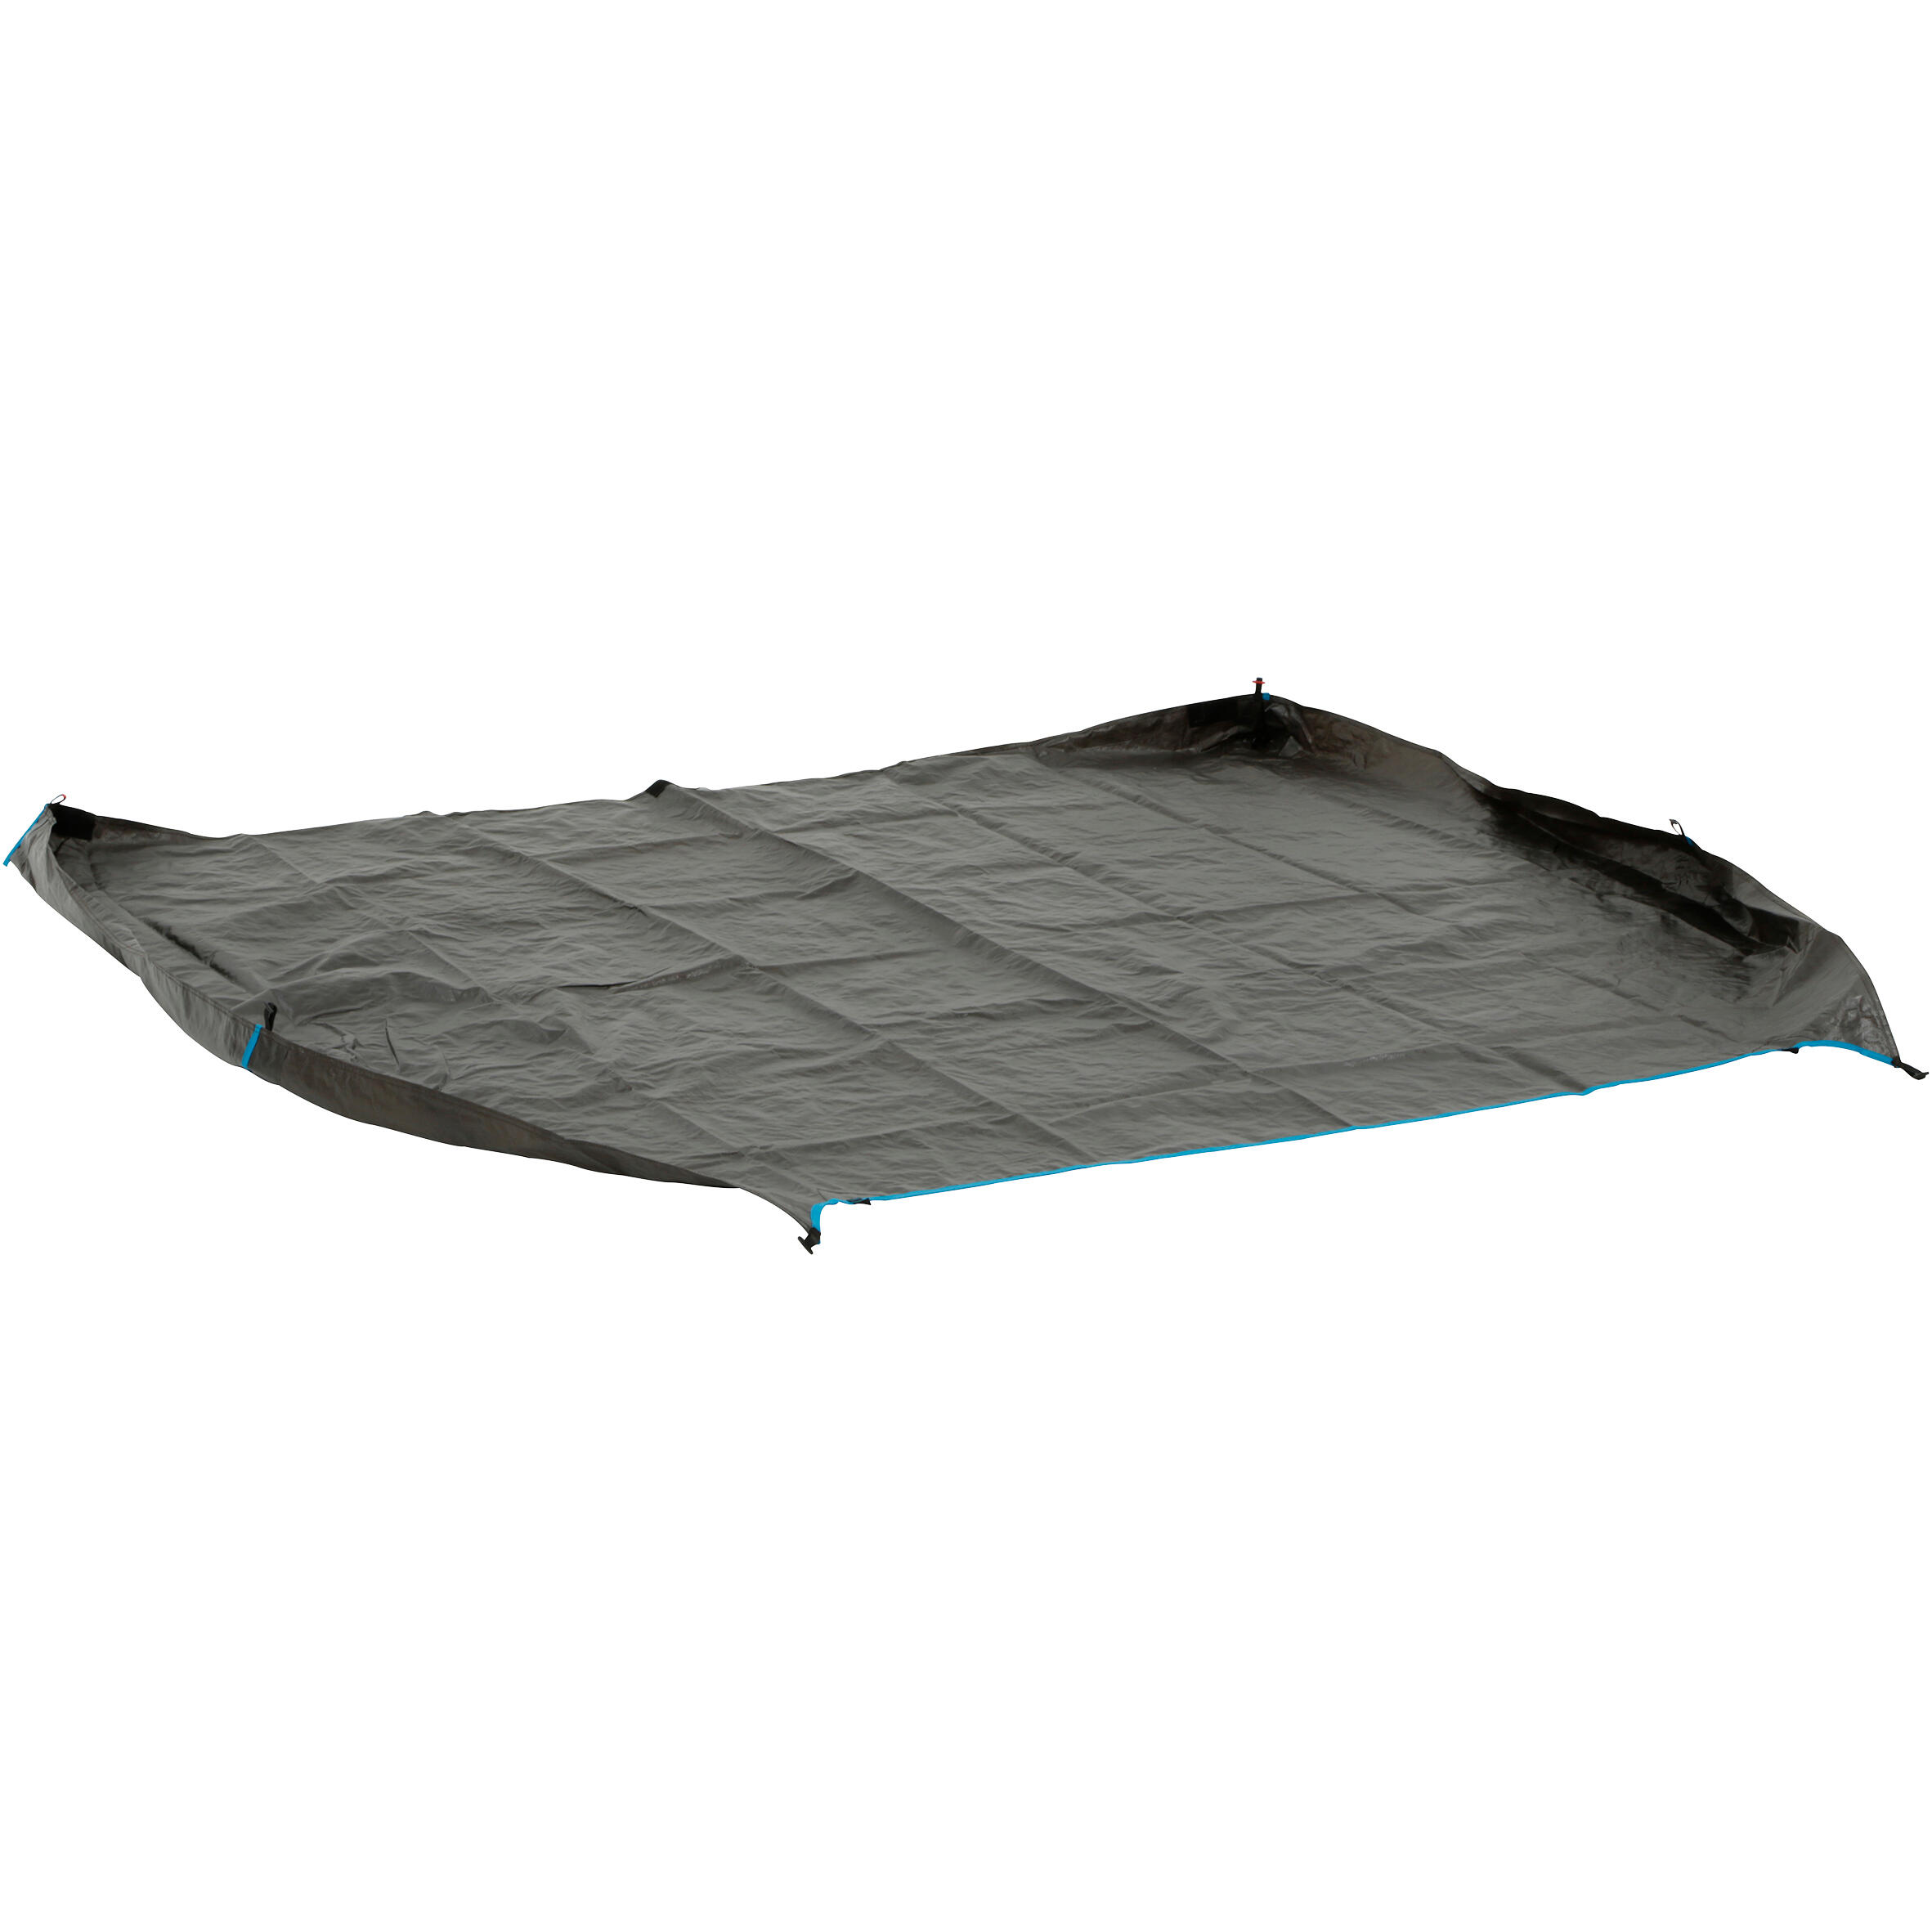 GROUNDSHEET - SPARE PART FOR THE AIR SECONDS 4.1 XL FRESH&BLACK TENT 1/1